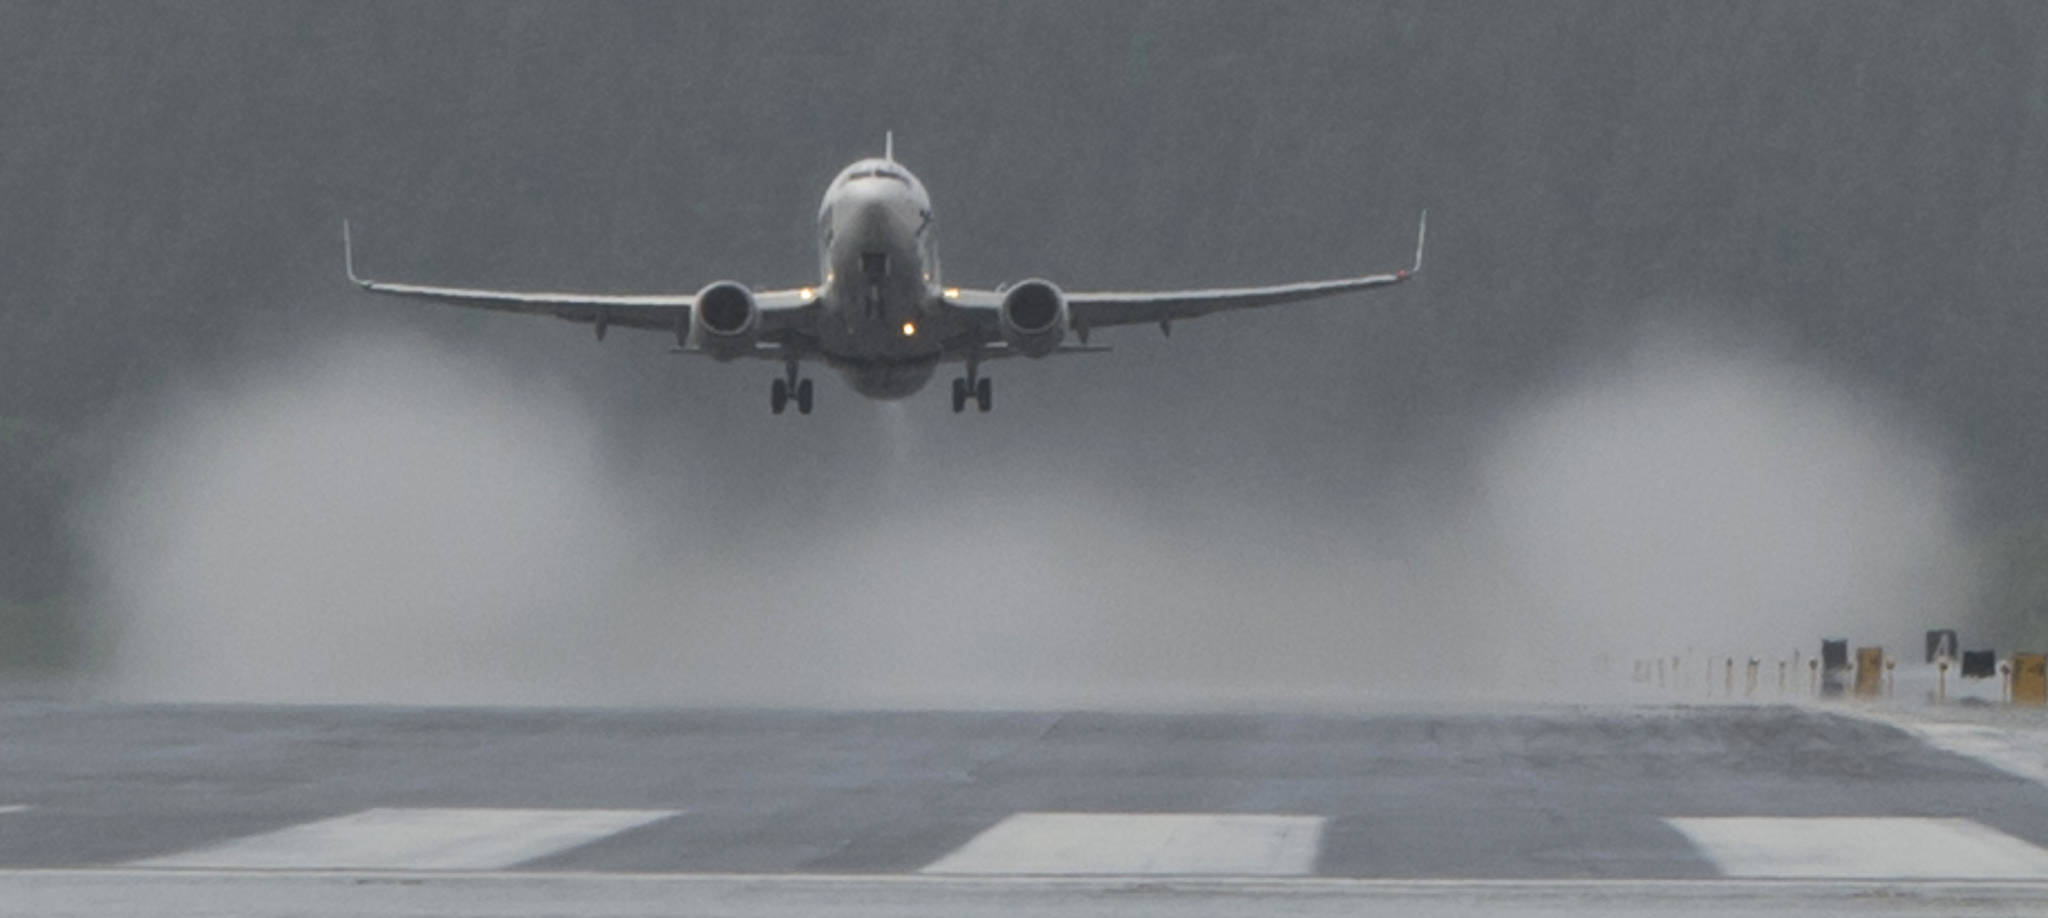 An Alaska Airlines 737 passenger jet as it takes off from Juneau International Airport in June 2017. This is not the flight mentioned in the article. (Michael Penn | Juneau Empire File)